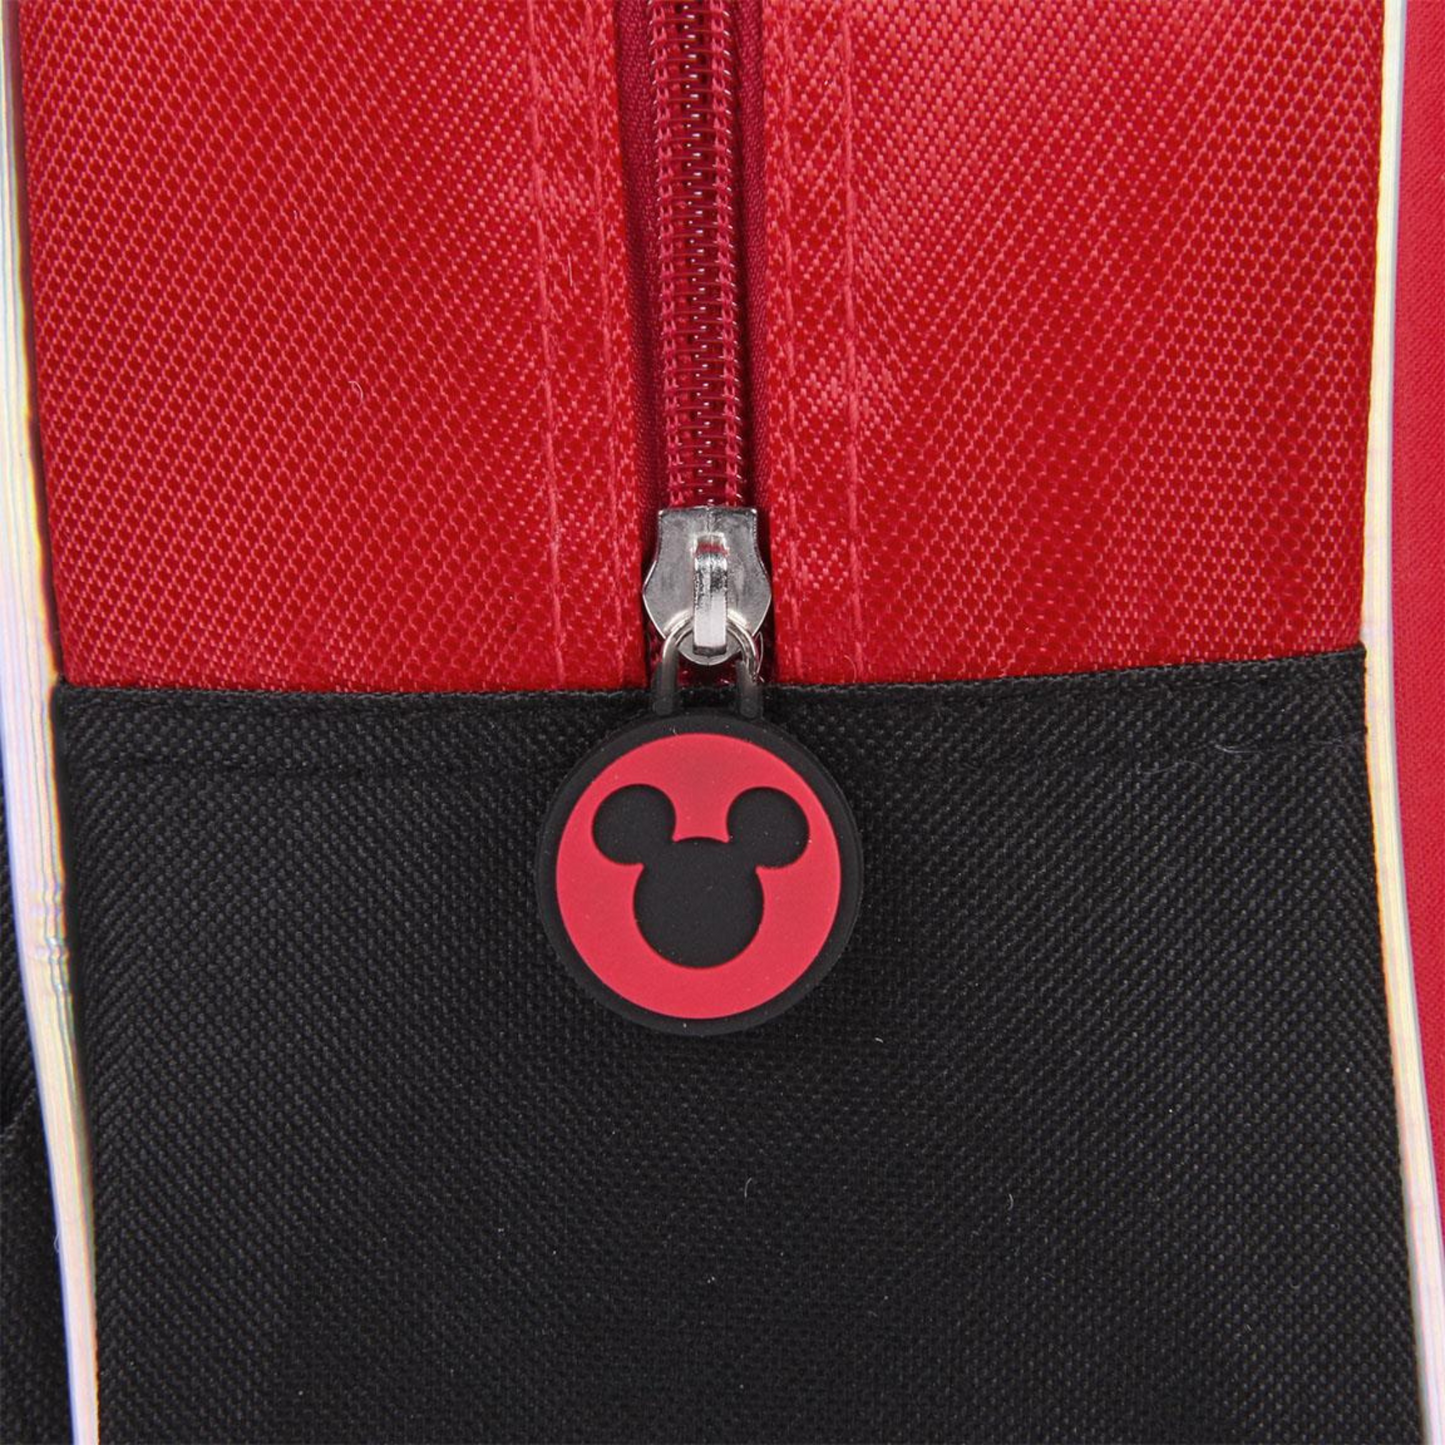 Mickey Mouse Kids 3D Backpack